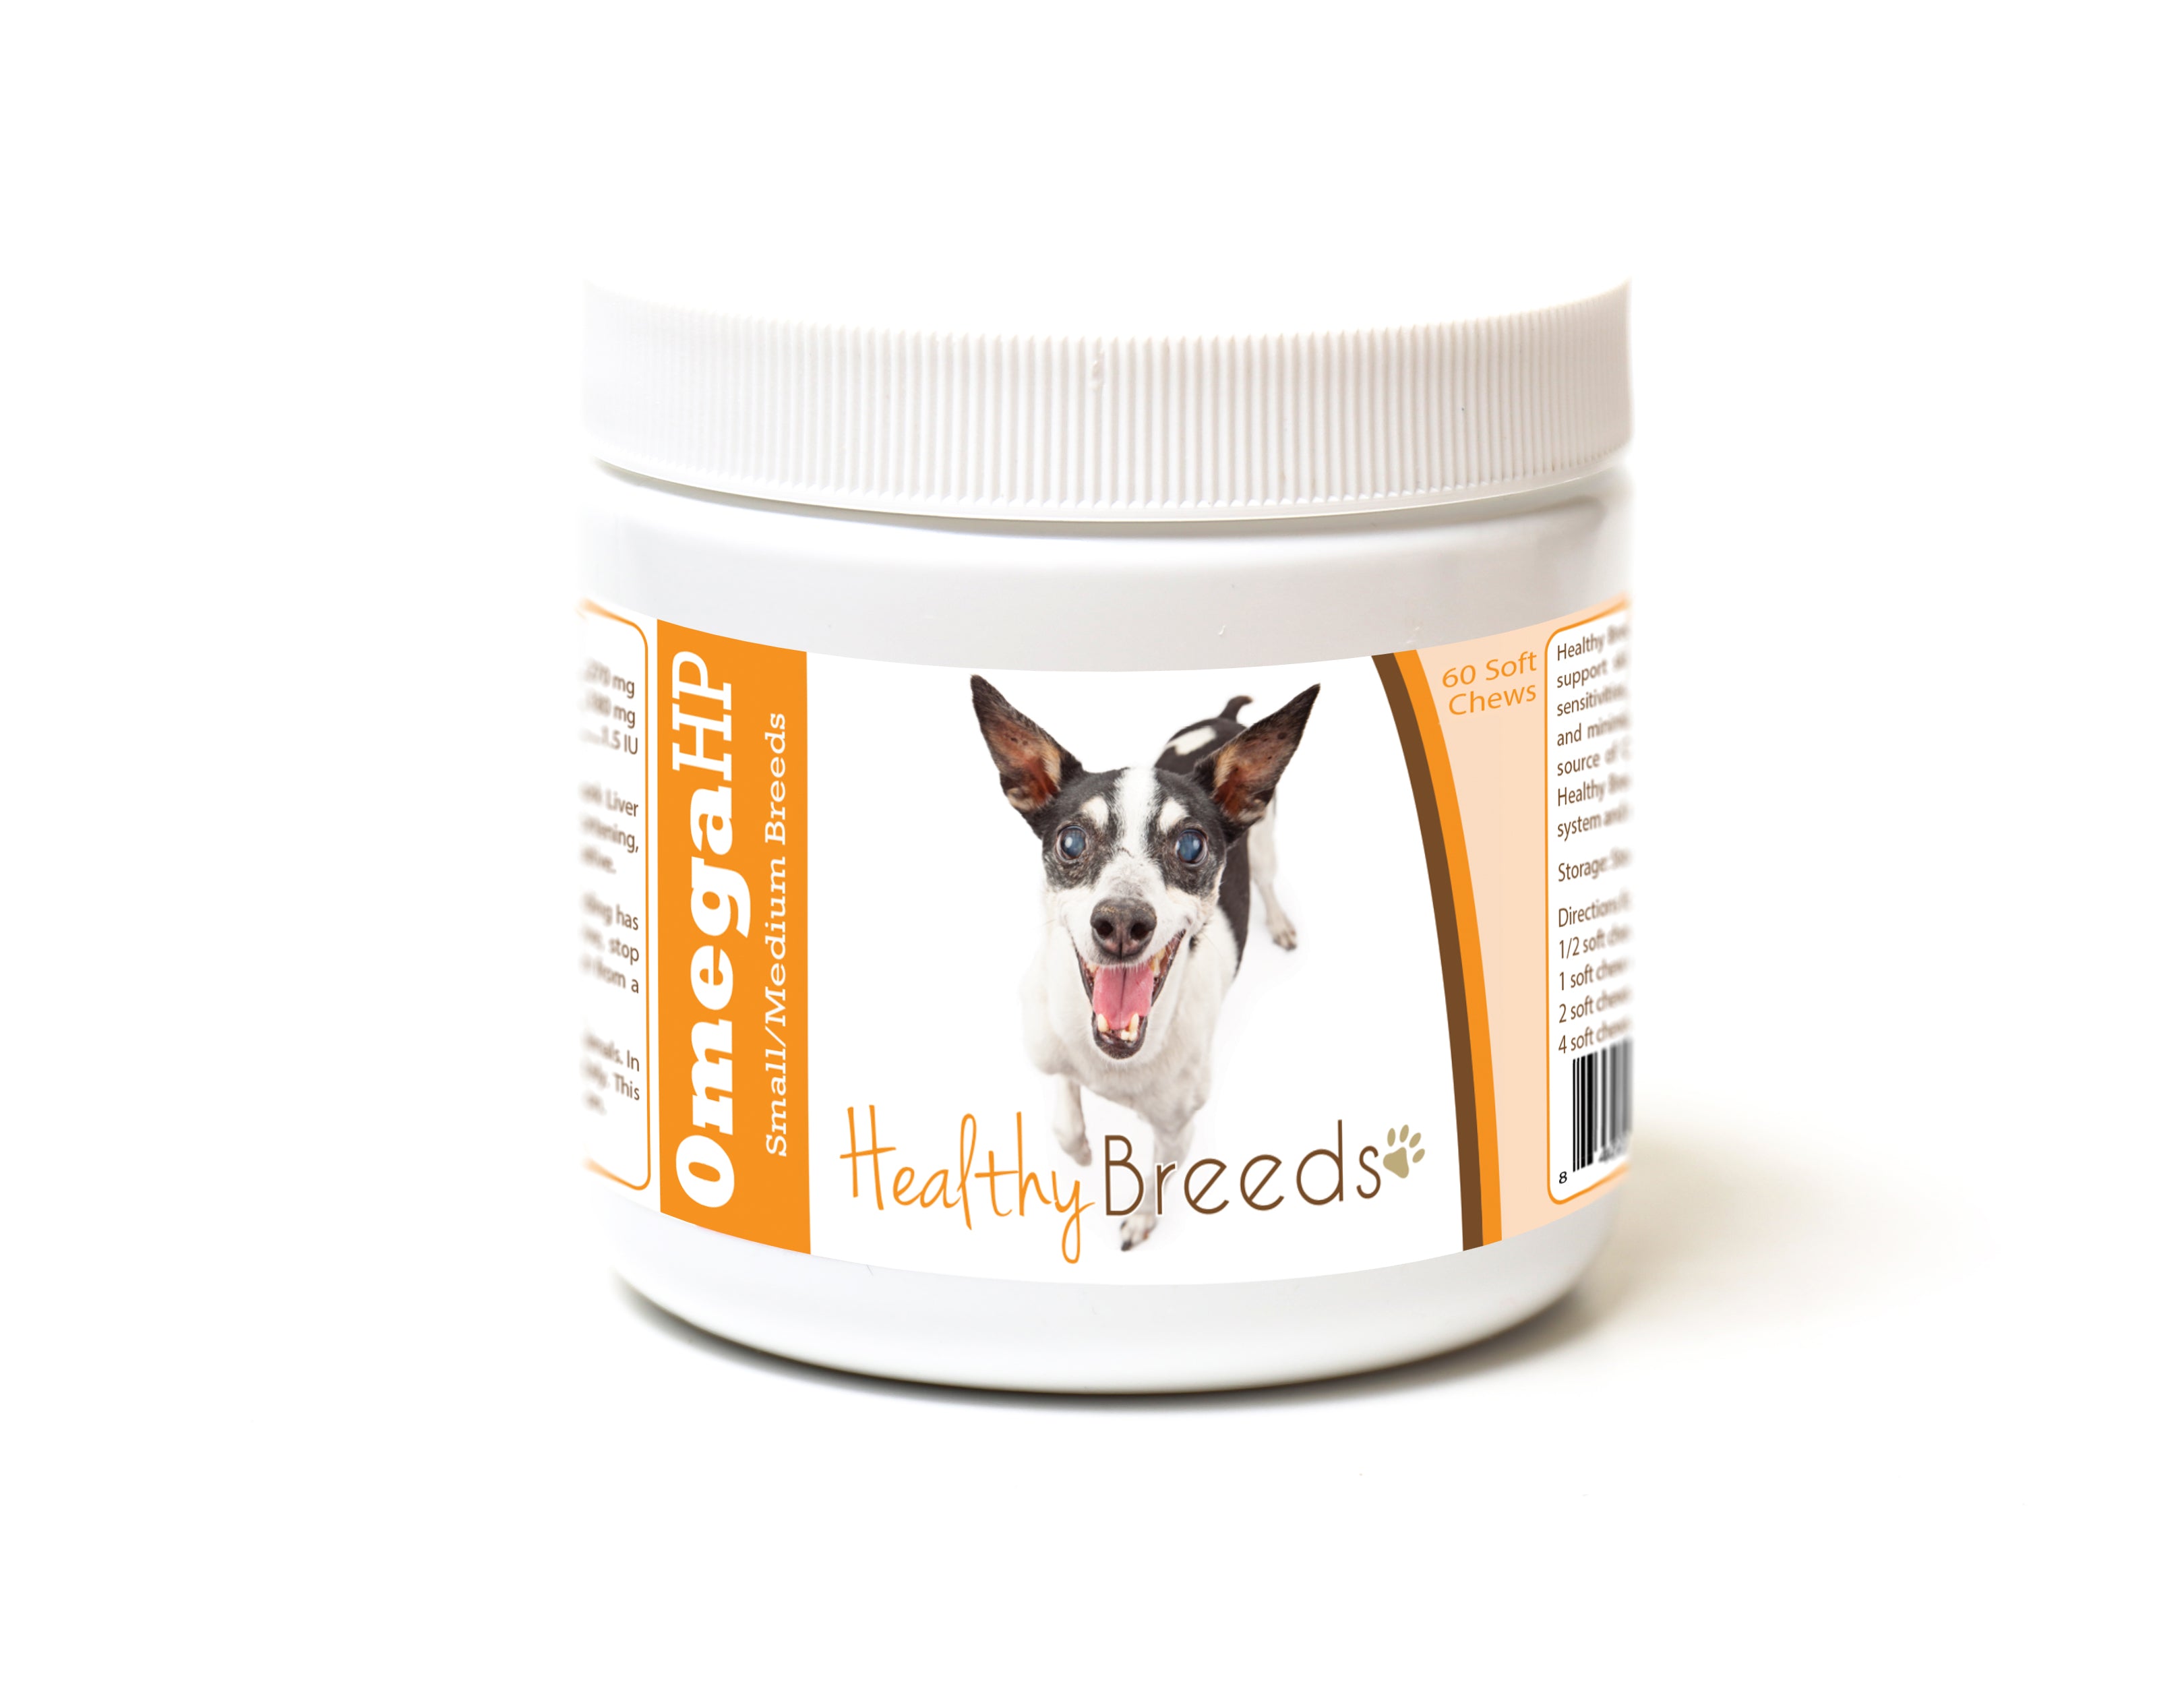 Rat Terrier Omega HP Fatty Acid Skin and Coat Support Soft Chews 60 Count